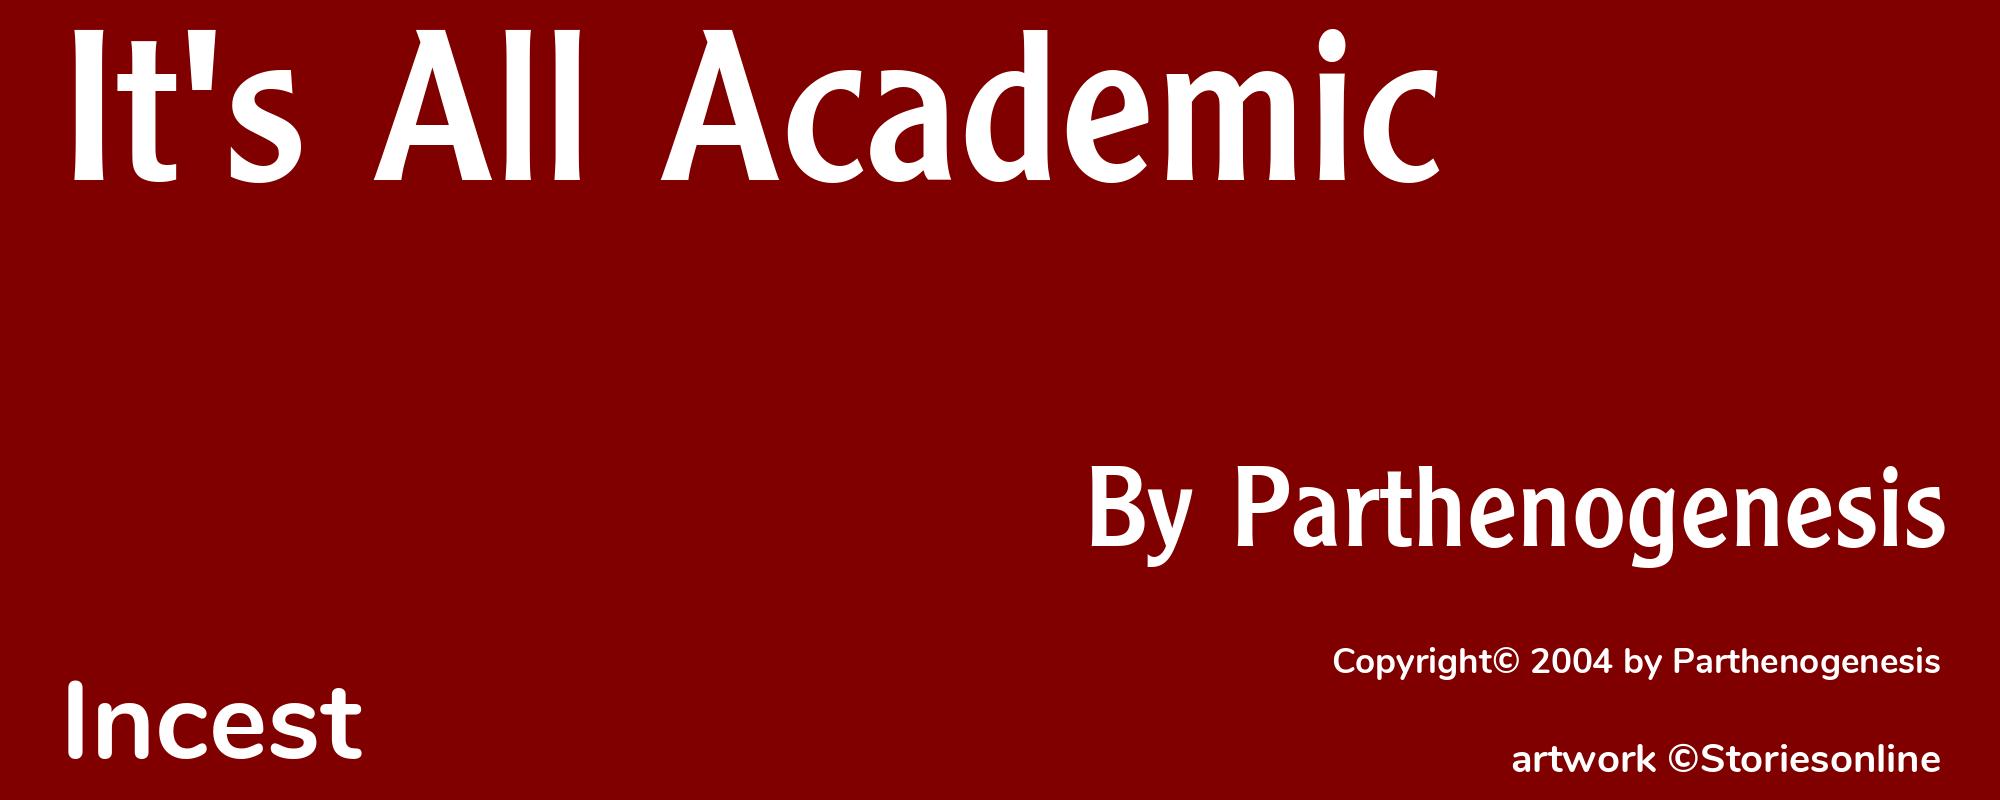 It's All Academic - Cover